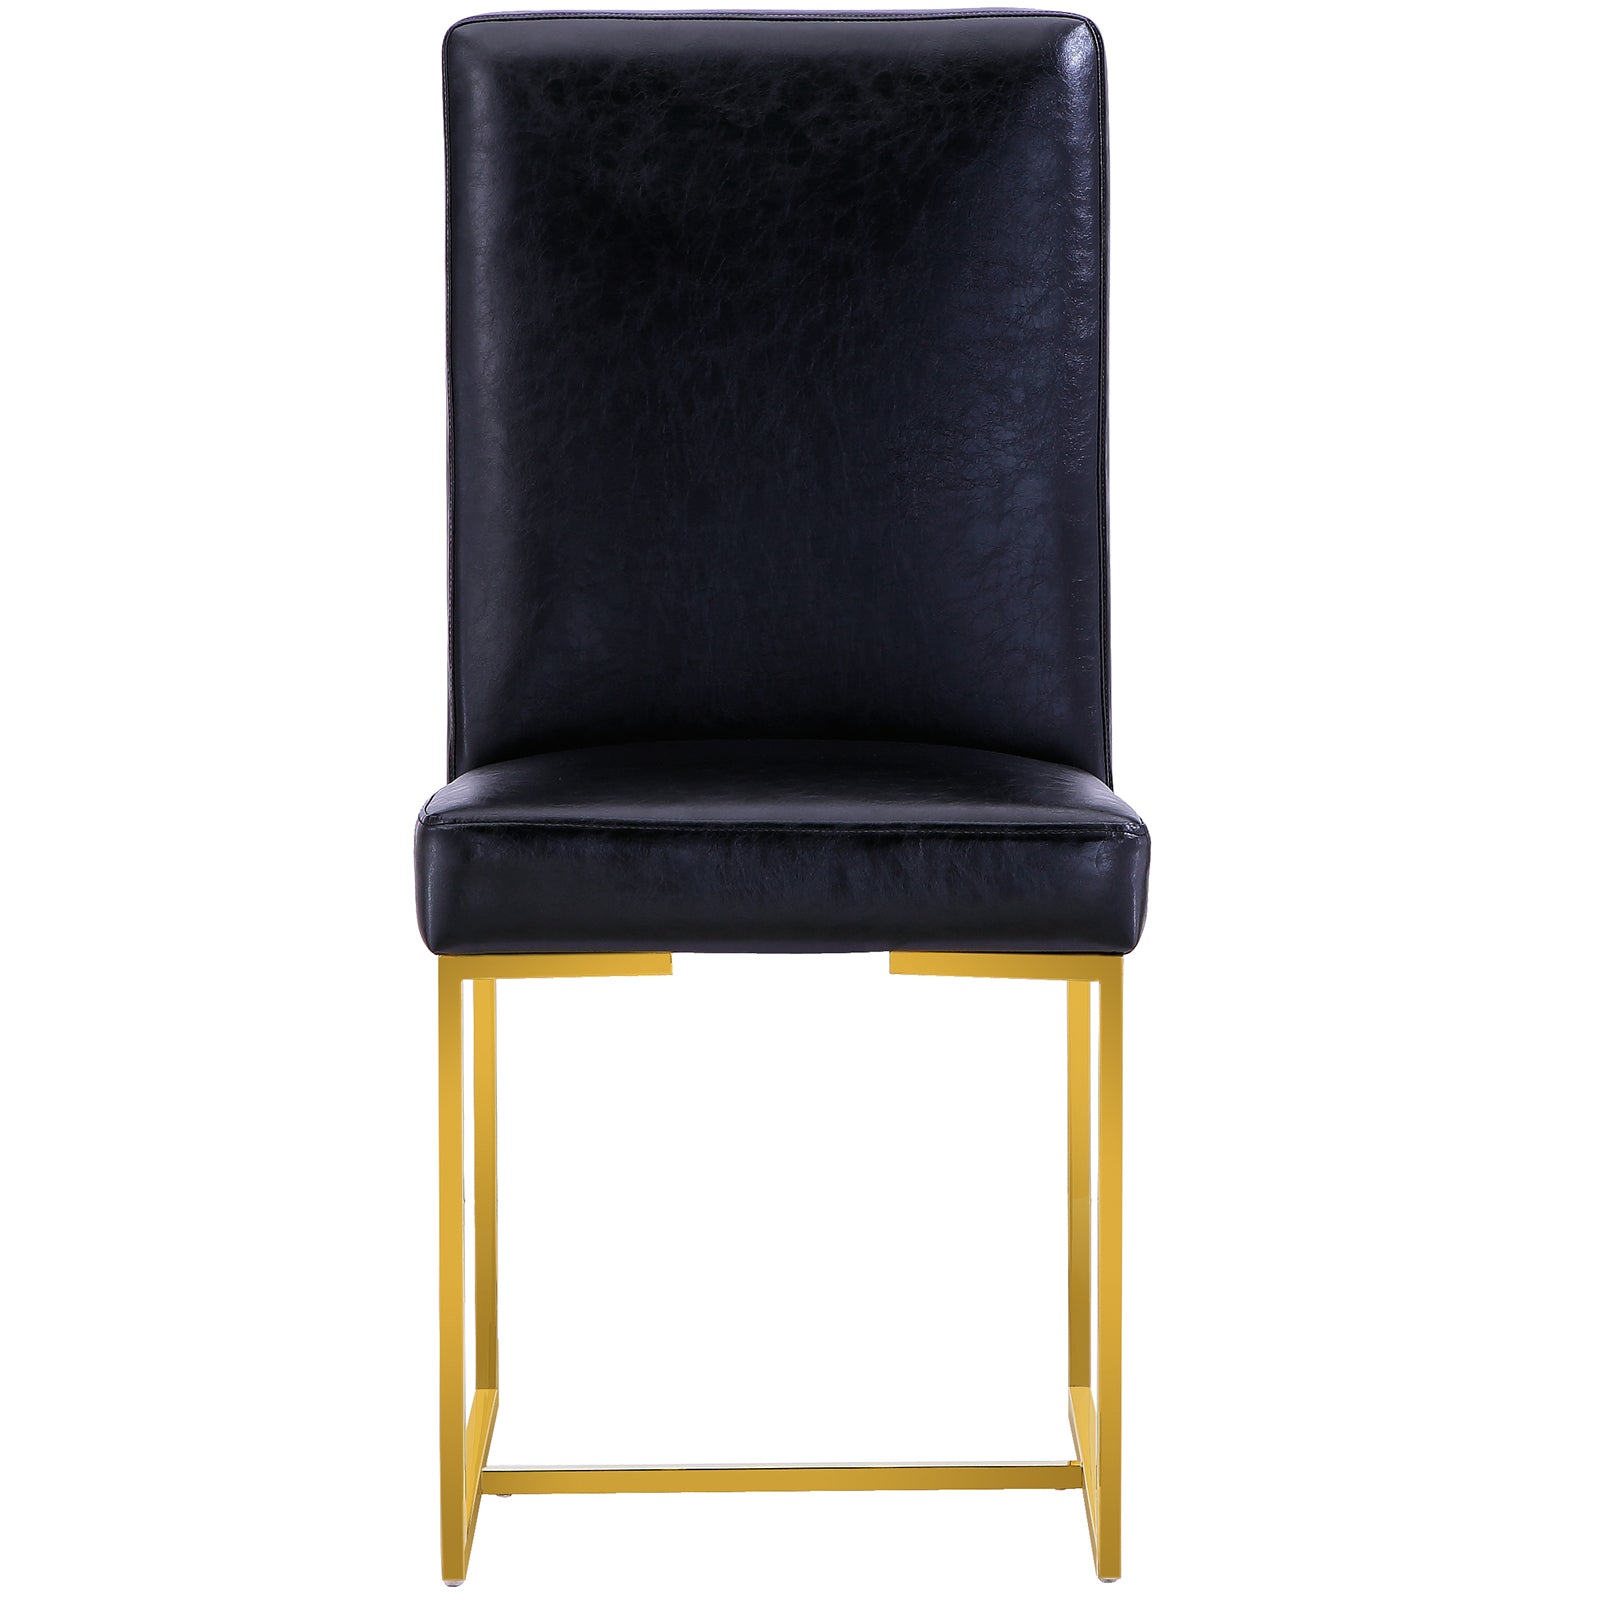 Black leather Dining Chairs | Square backrest| Metal sled base | C147